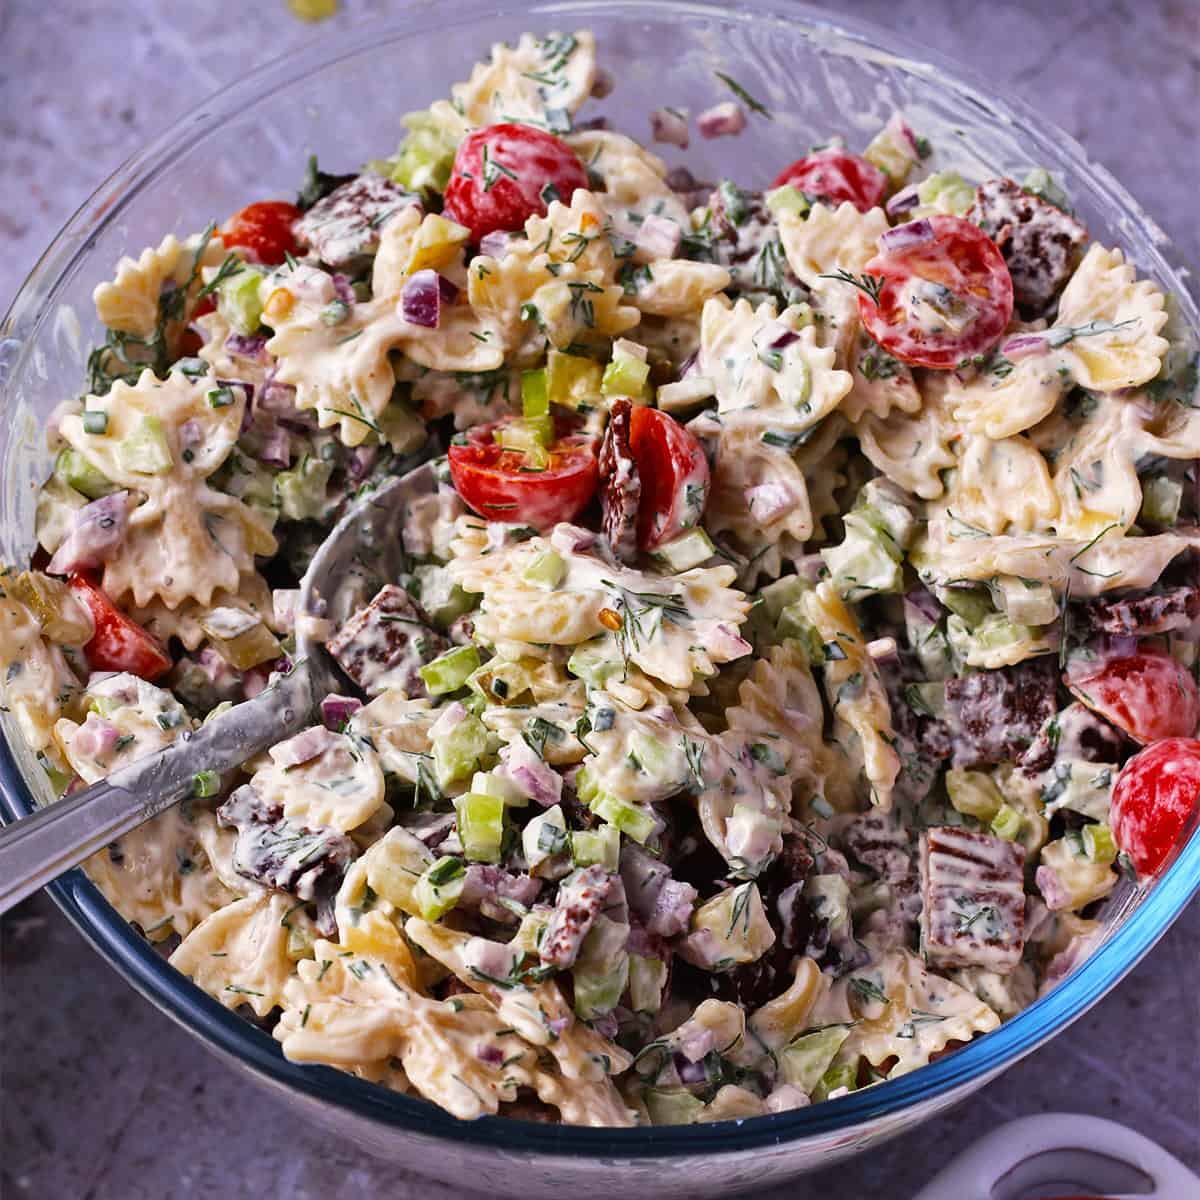 A bowl of vegan dill pickle pasta salad with tofu bacon, ranch dressing, tomatoes, celery, and red onions.